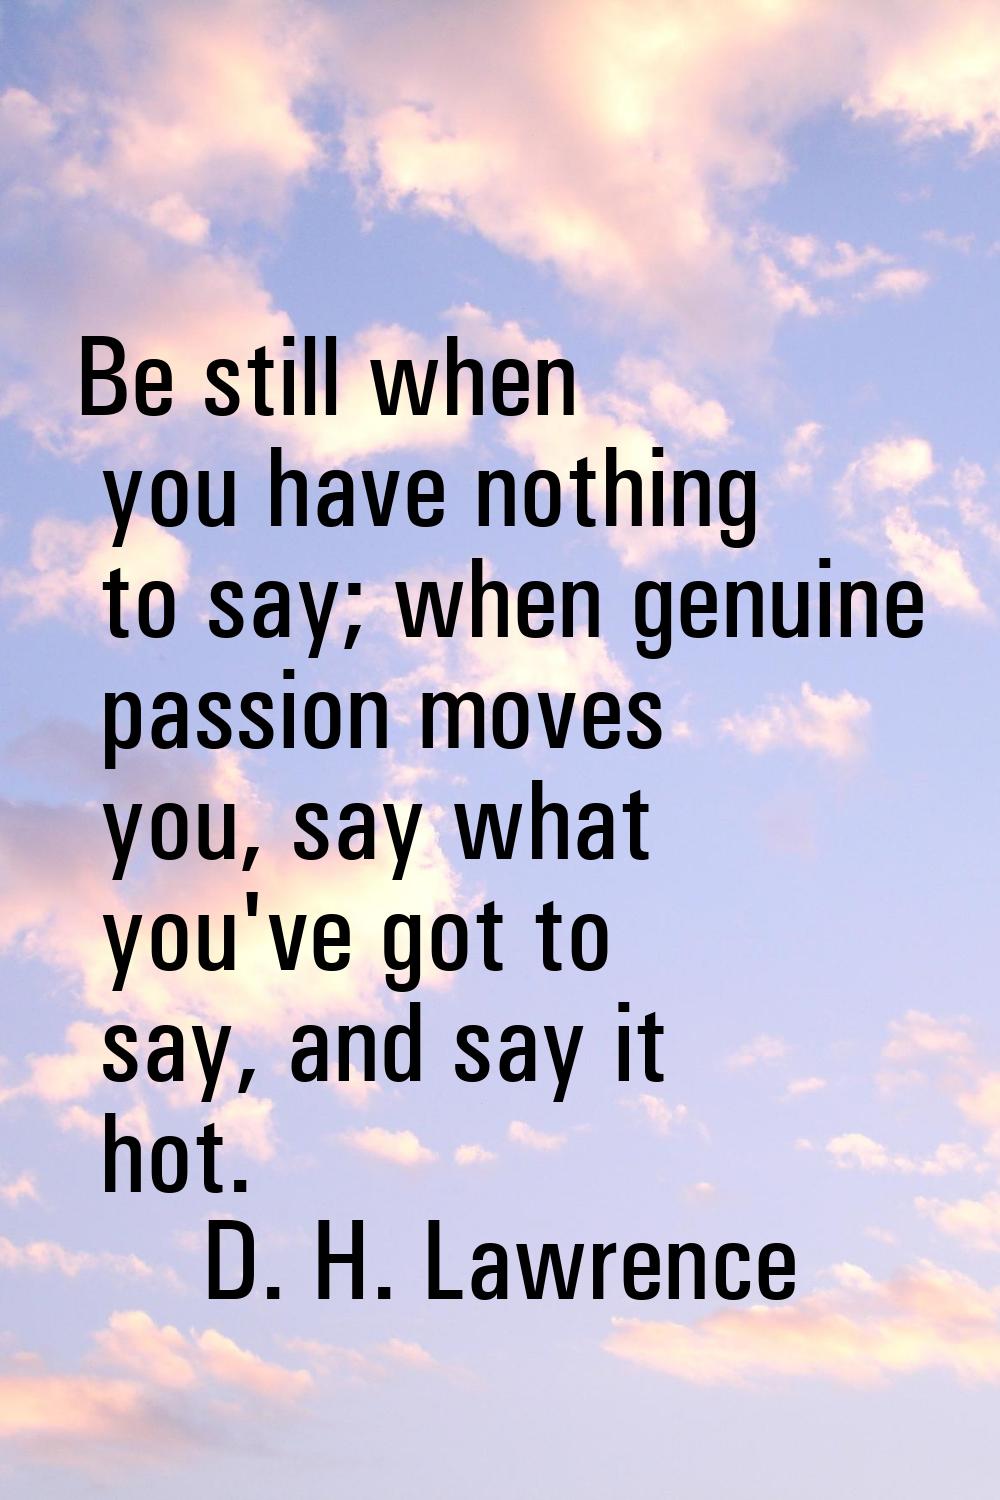 Be still when you have nothing to say; when genuine passion moves you, say what you've got to say, 